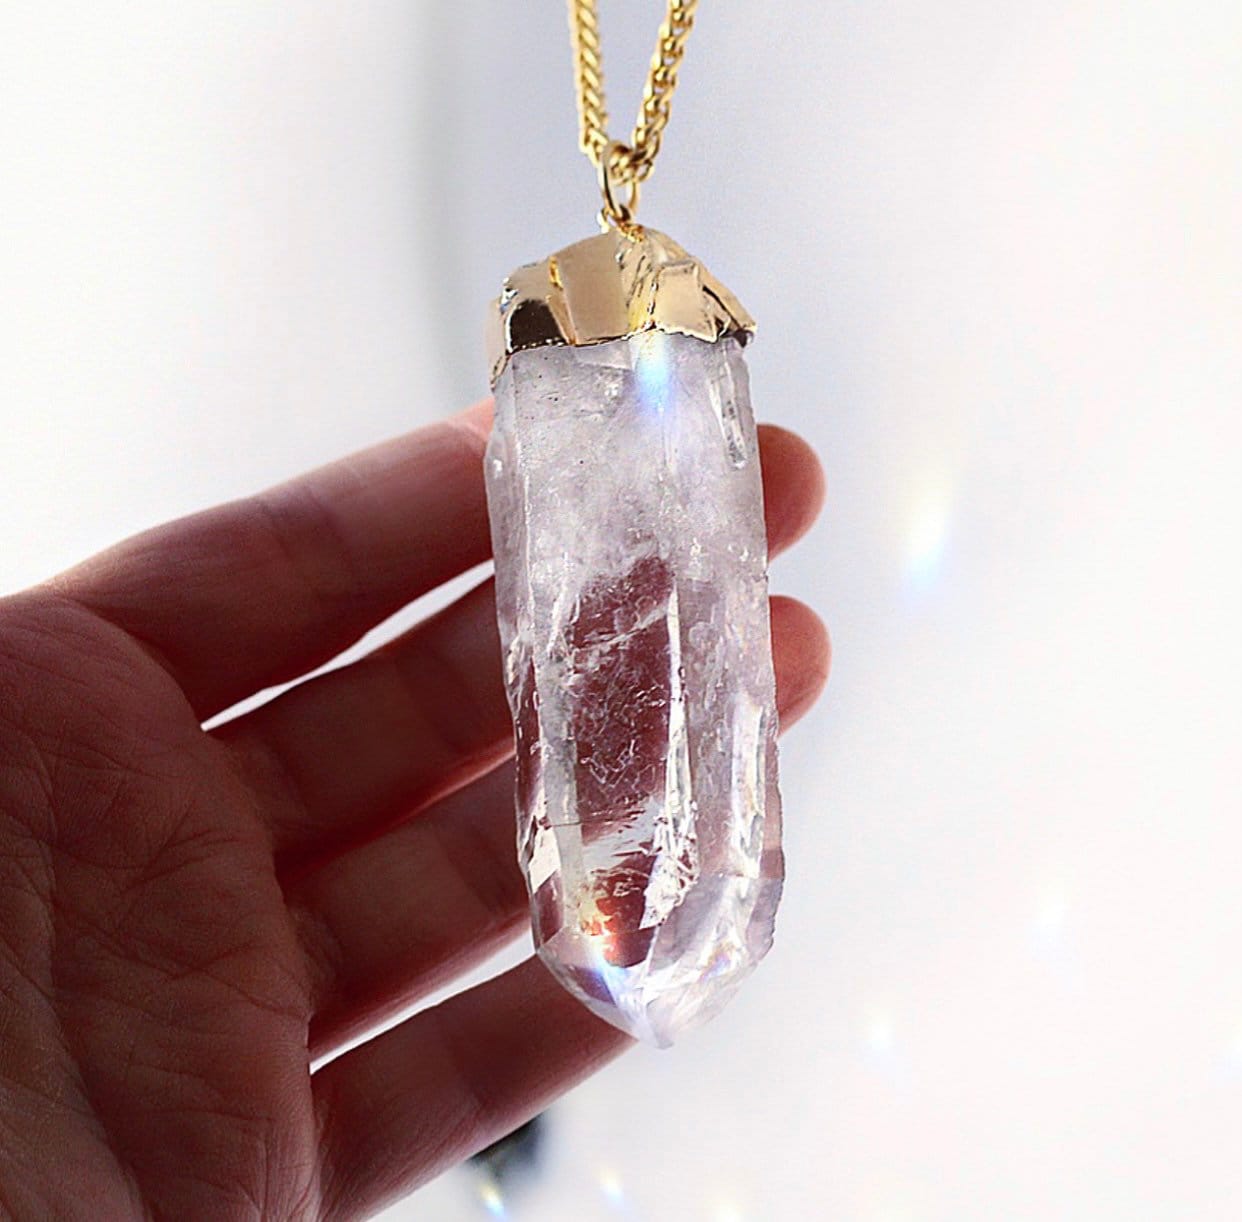 Dropship Crystal Necklace; Natural Quartz Stone Healing Crystal Pendant  Necklace Full Wire Wrap Gemstone Necklace For Women to Sell Online at a  Lower Price | Doba